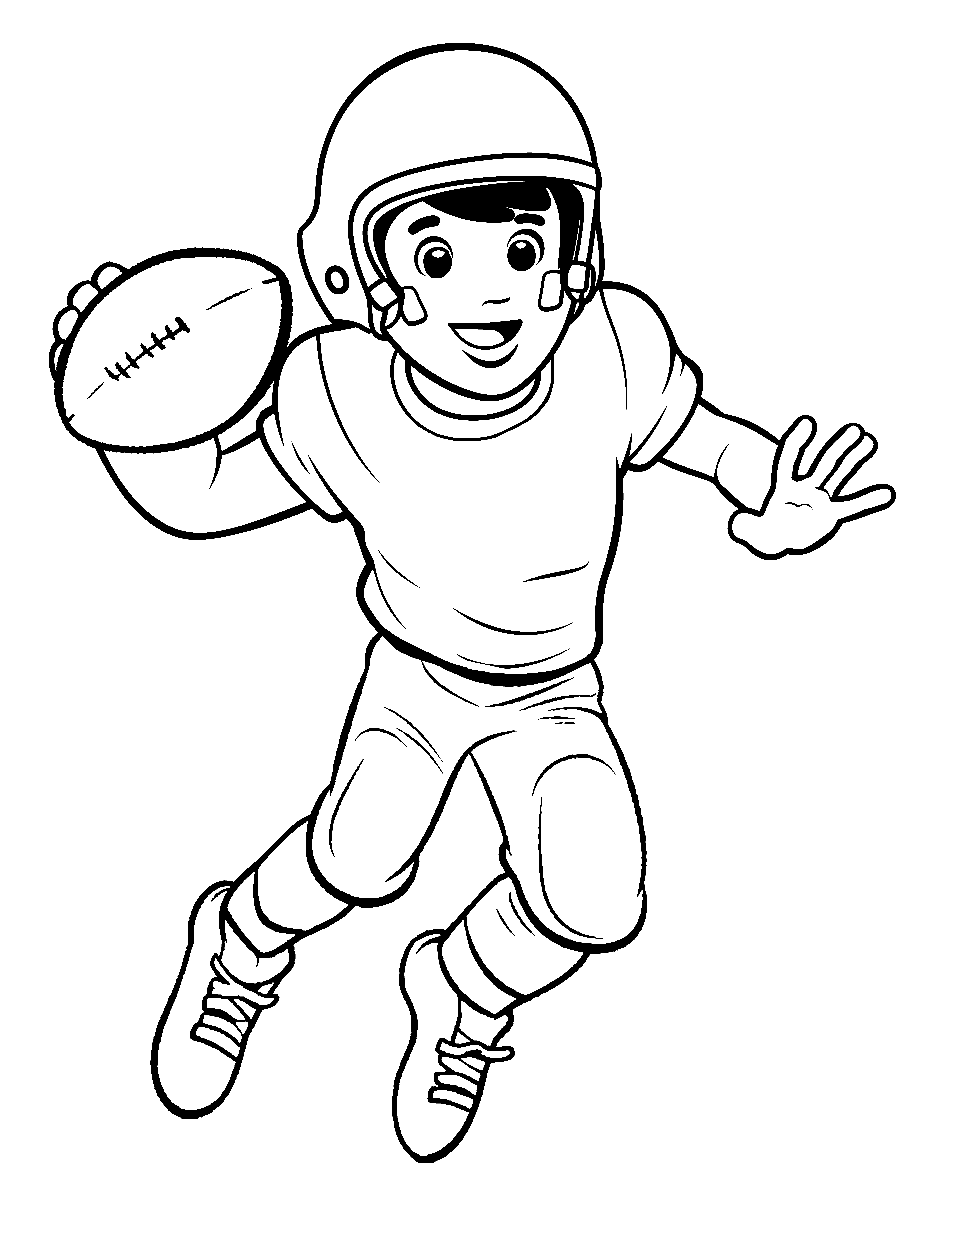 Precision Pass Coloring Page - A football being thrown by a quarterback.